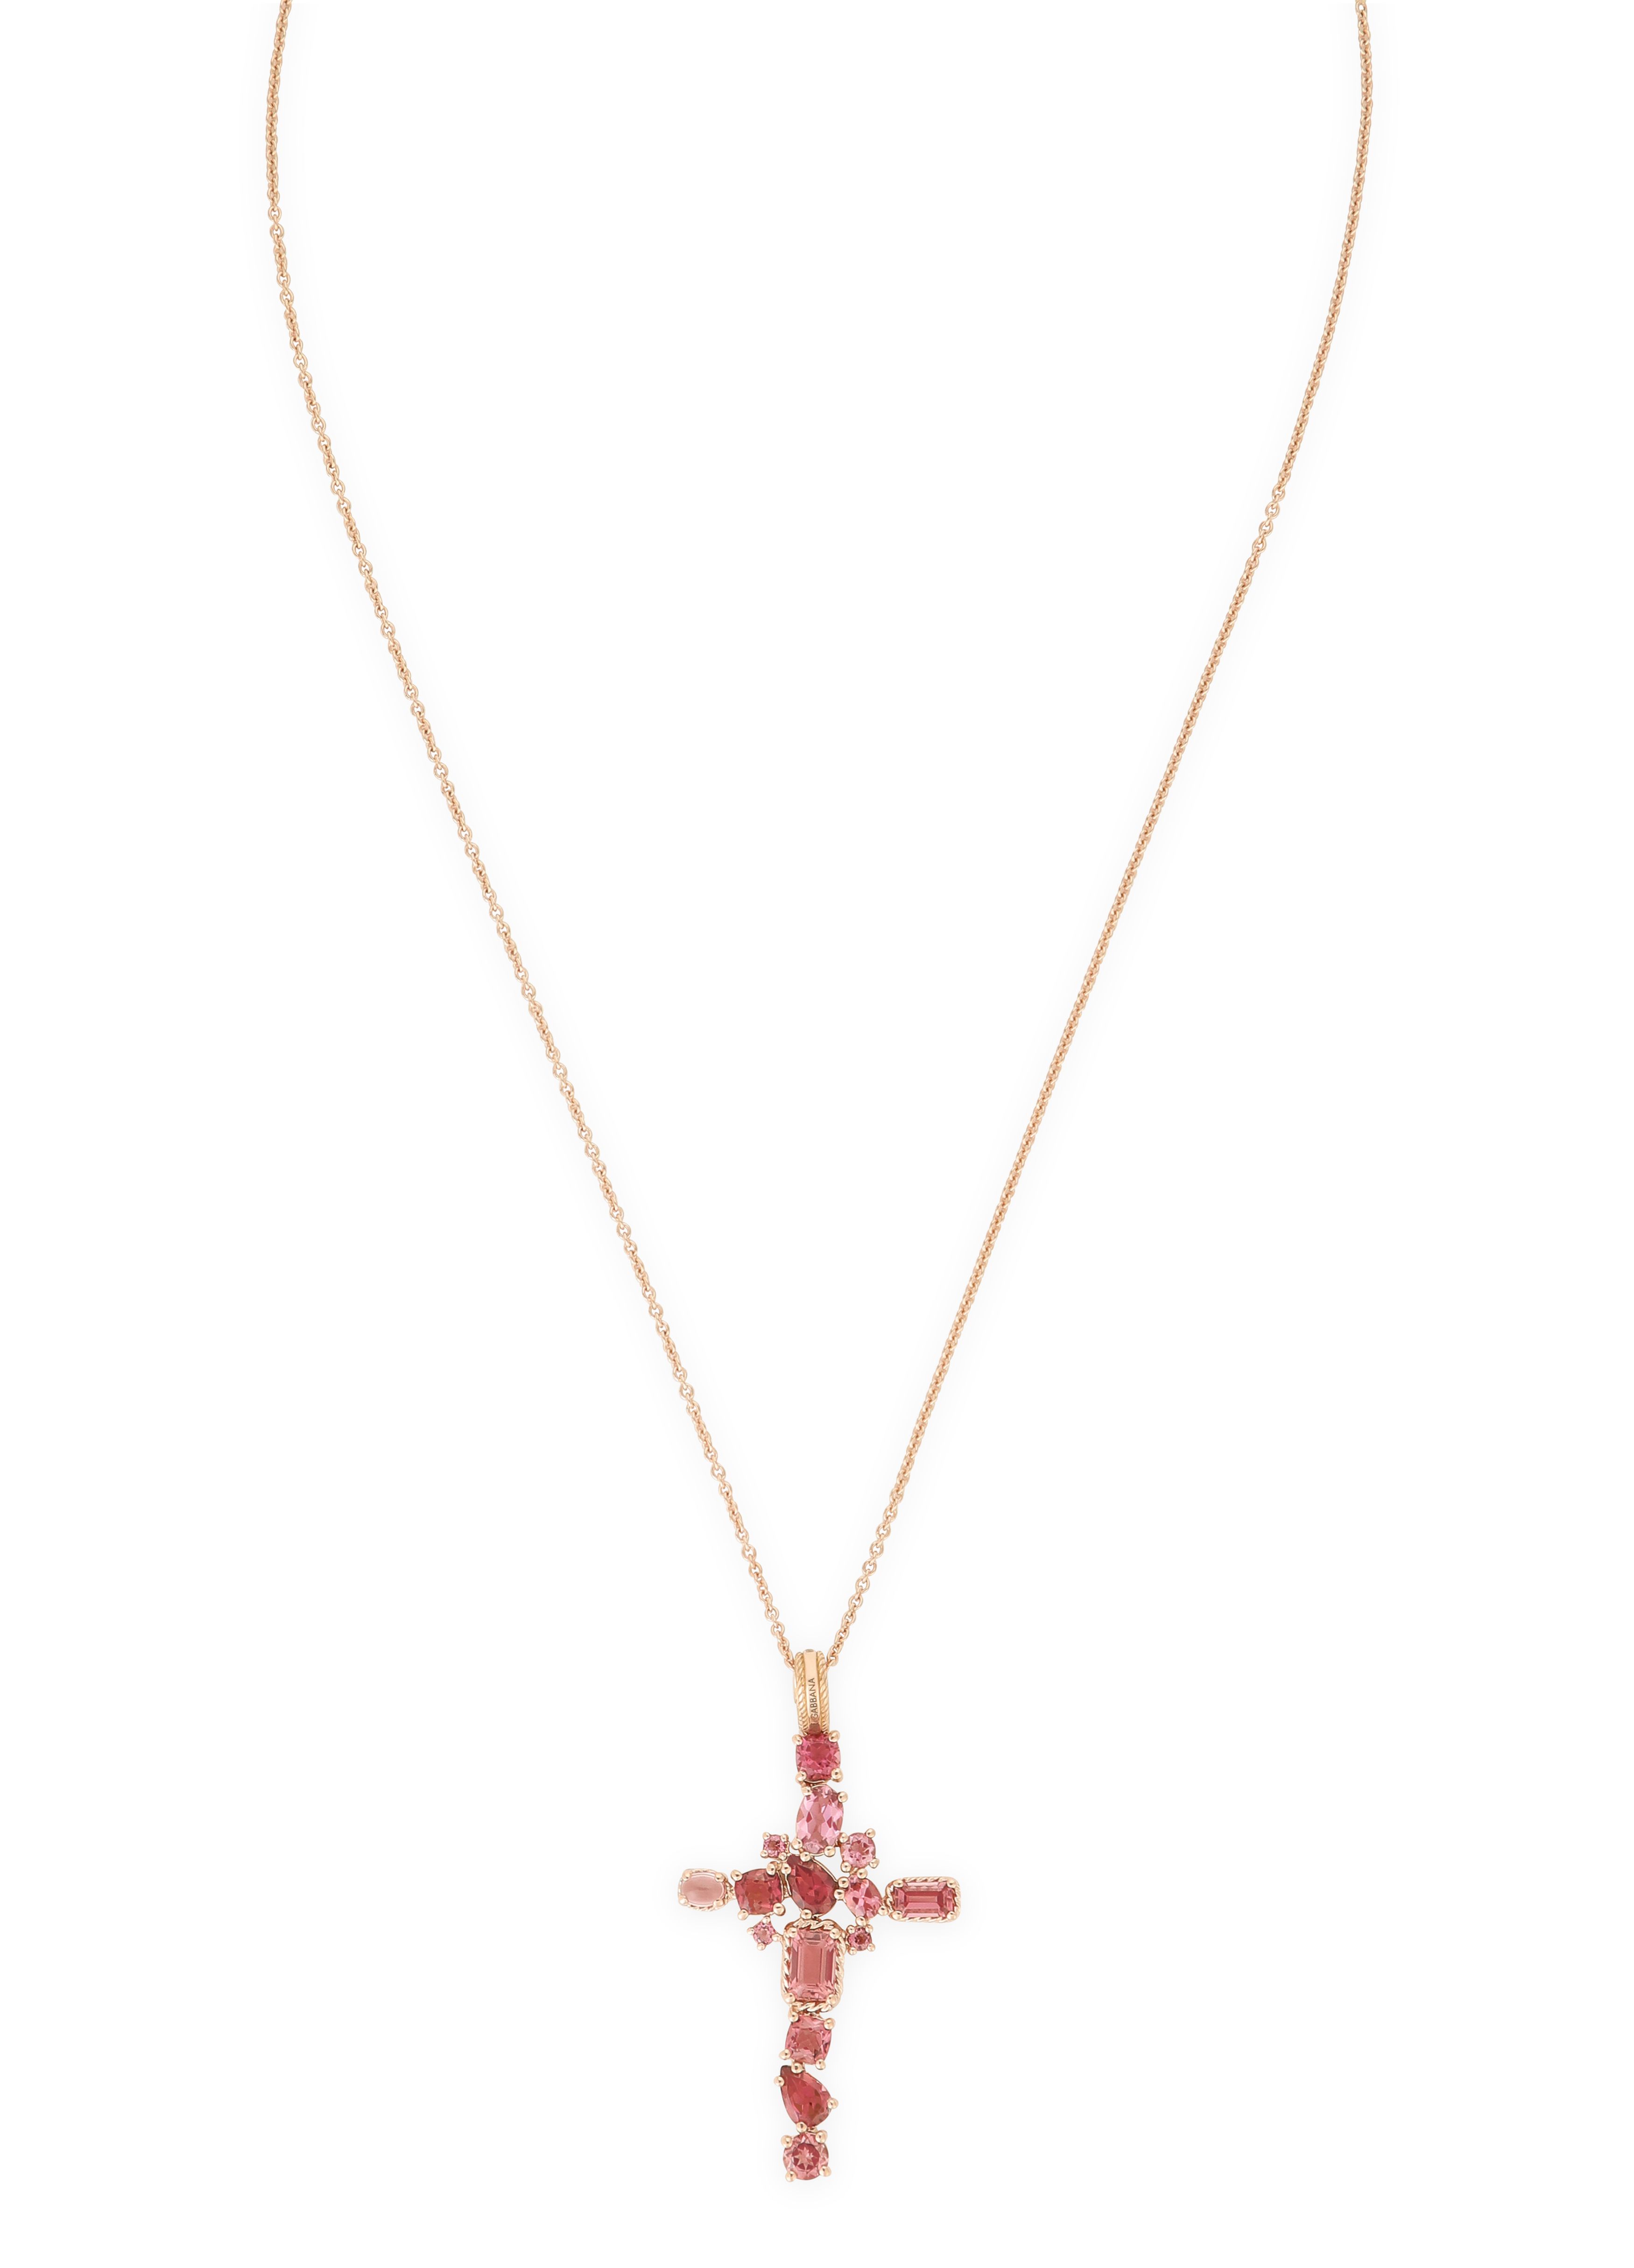 Dolce & Gabbana Anna pendant in red gold 18kt